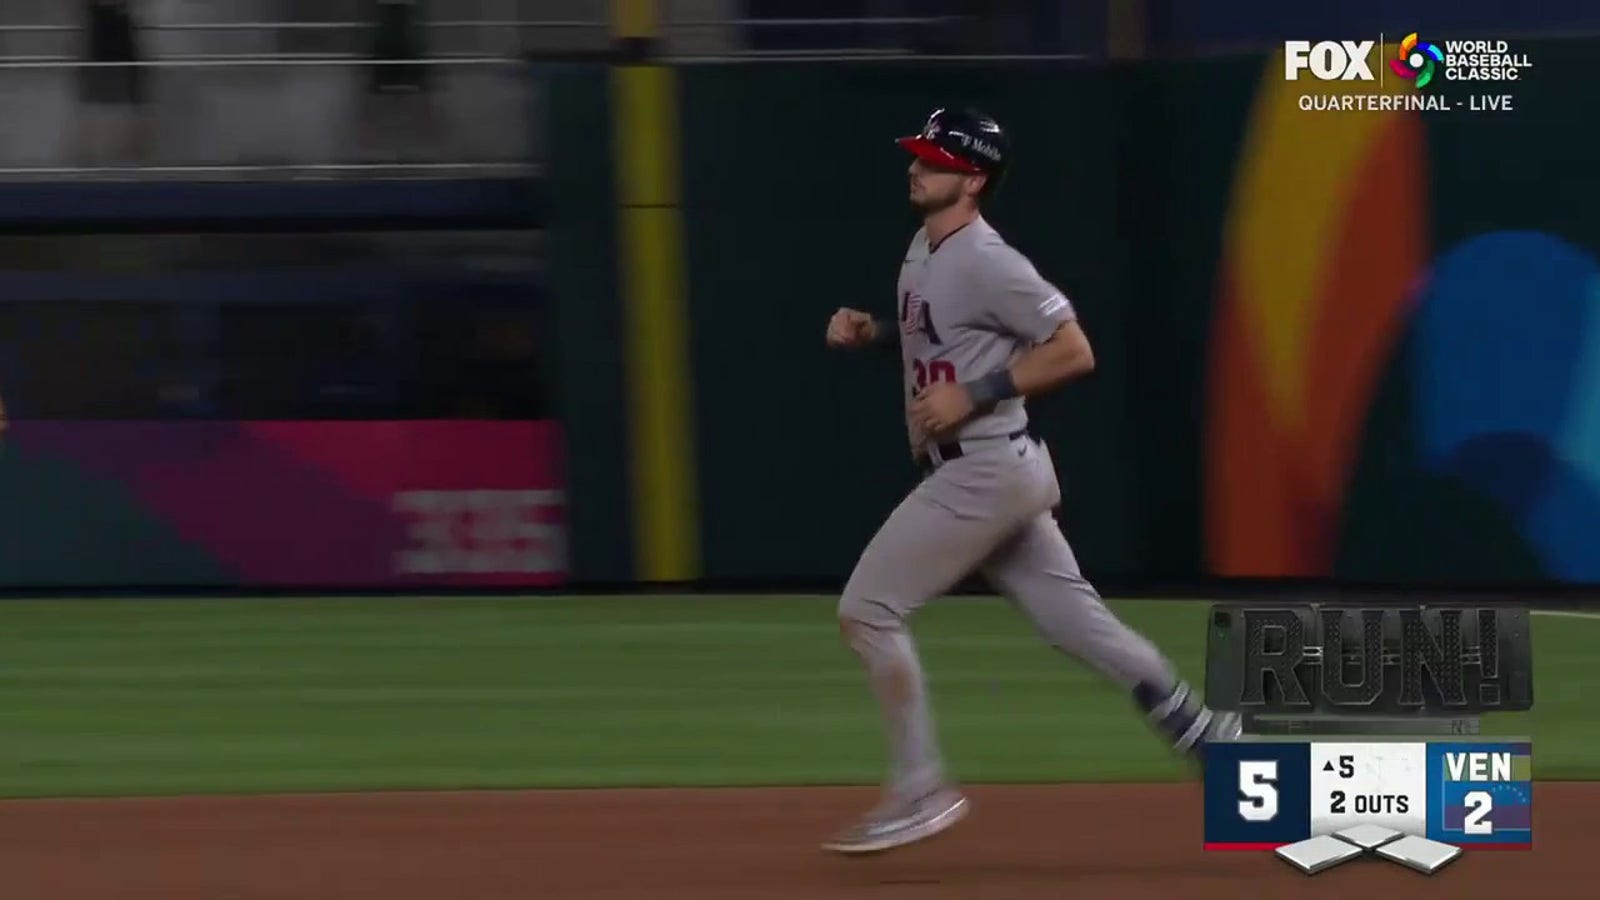 Kyle Tucker hit a solo home run to the right giving the US a 5-2 lead over Venezuela